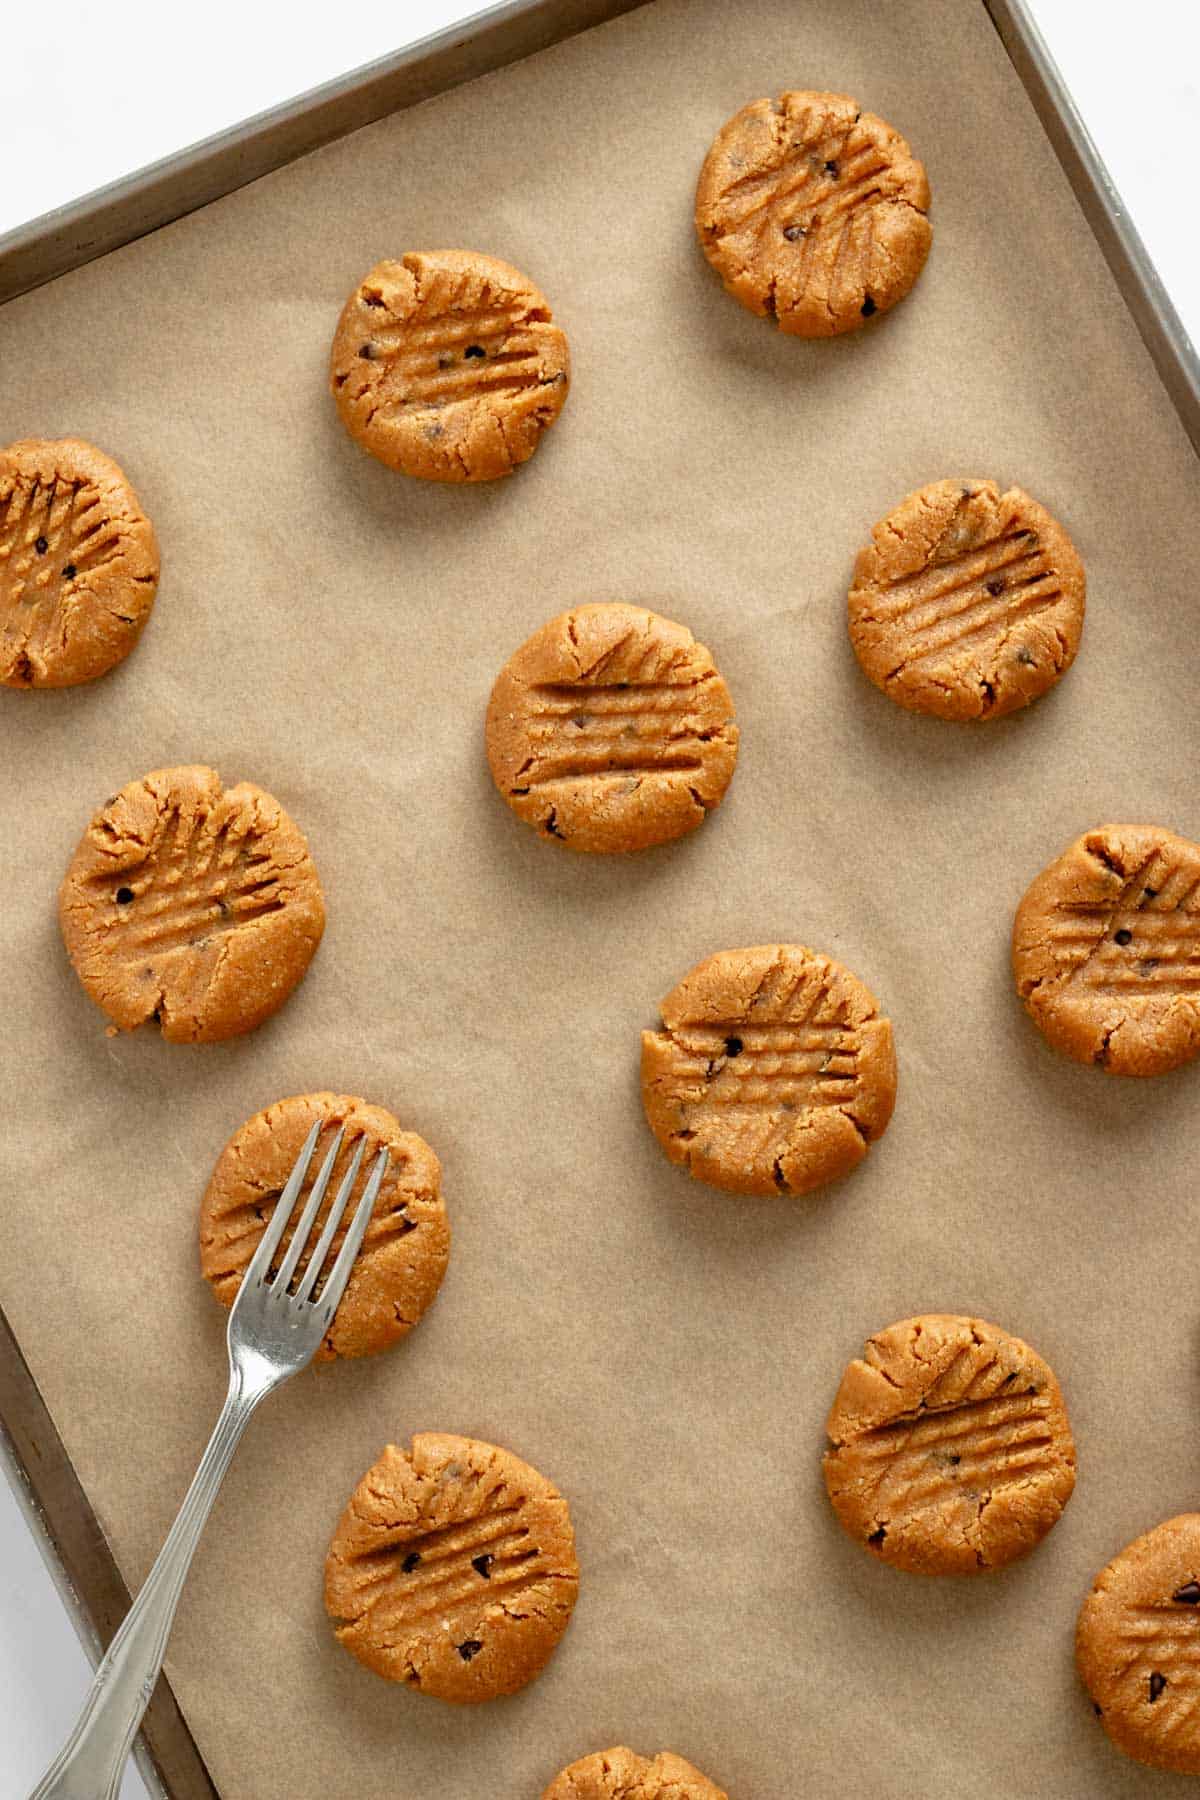 making criss cross pattern with a fork on peanut butter cookies.